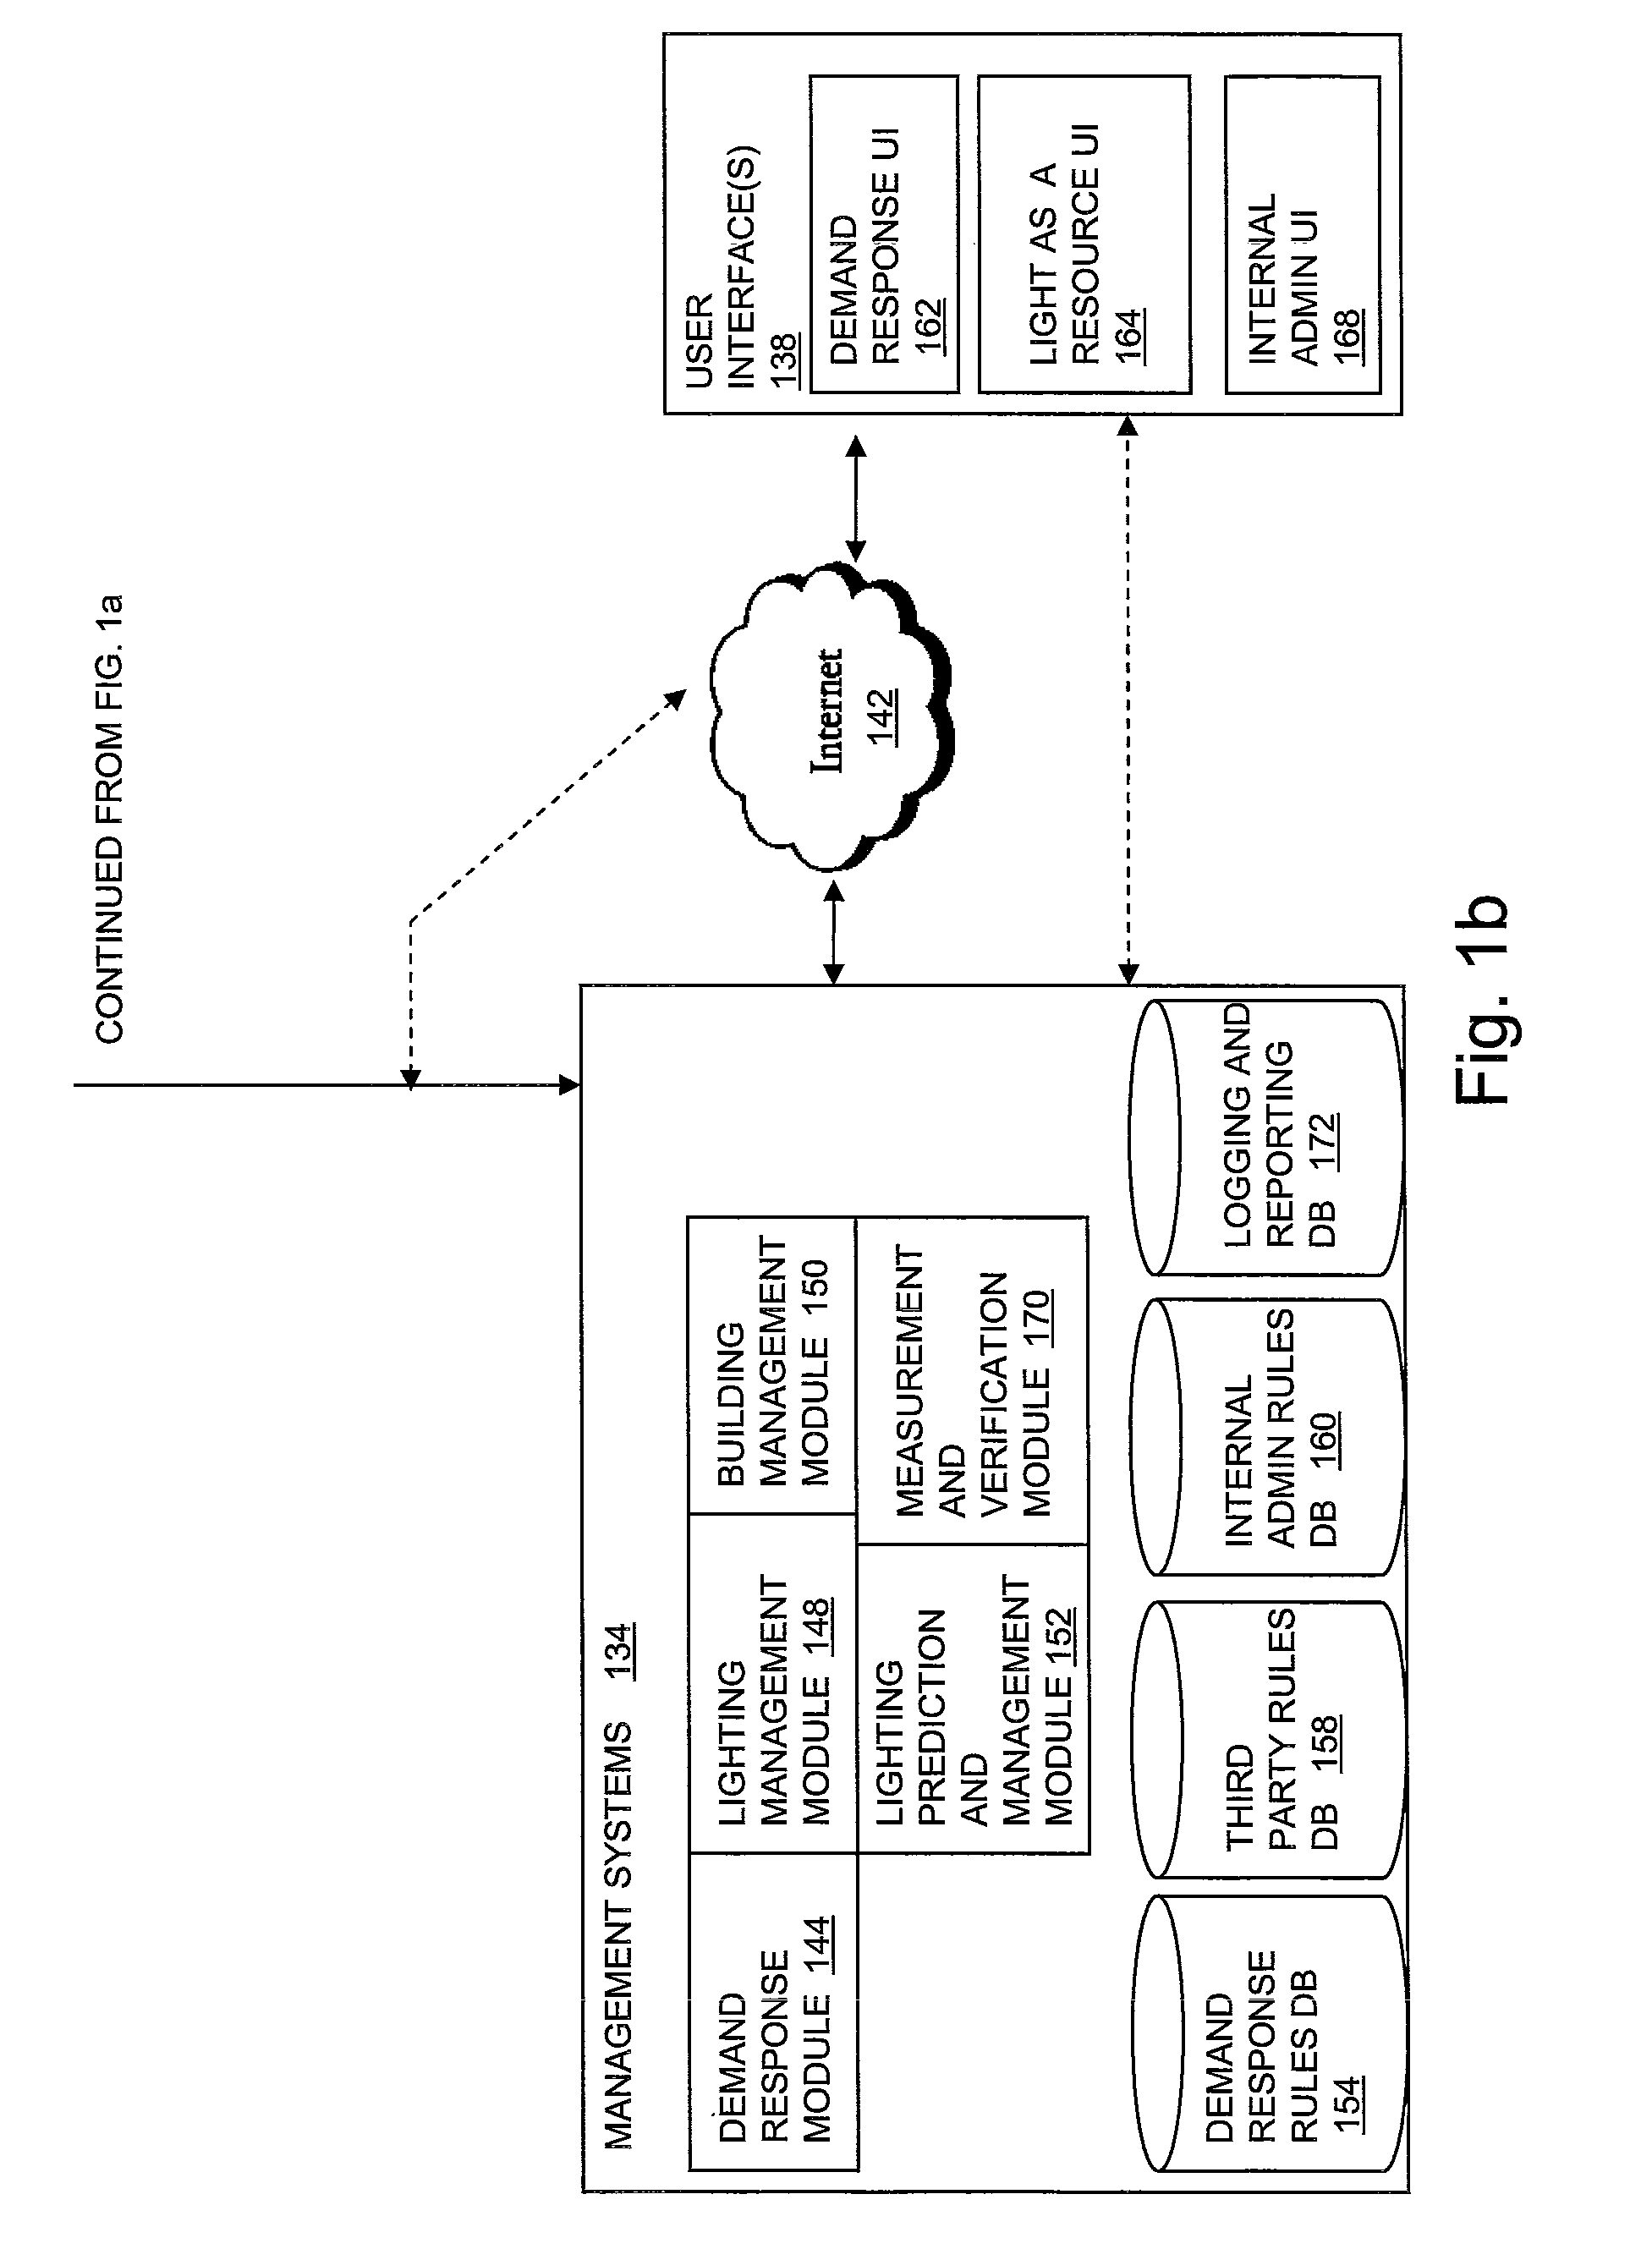 LED-based lighting methods, apparatus, and systems employing LED light bars, occupancy sensing, local state machine, and meter circuit